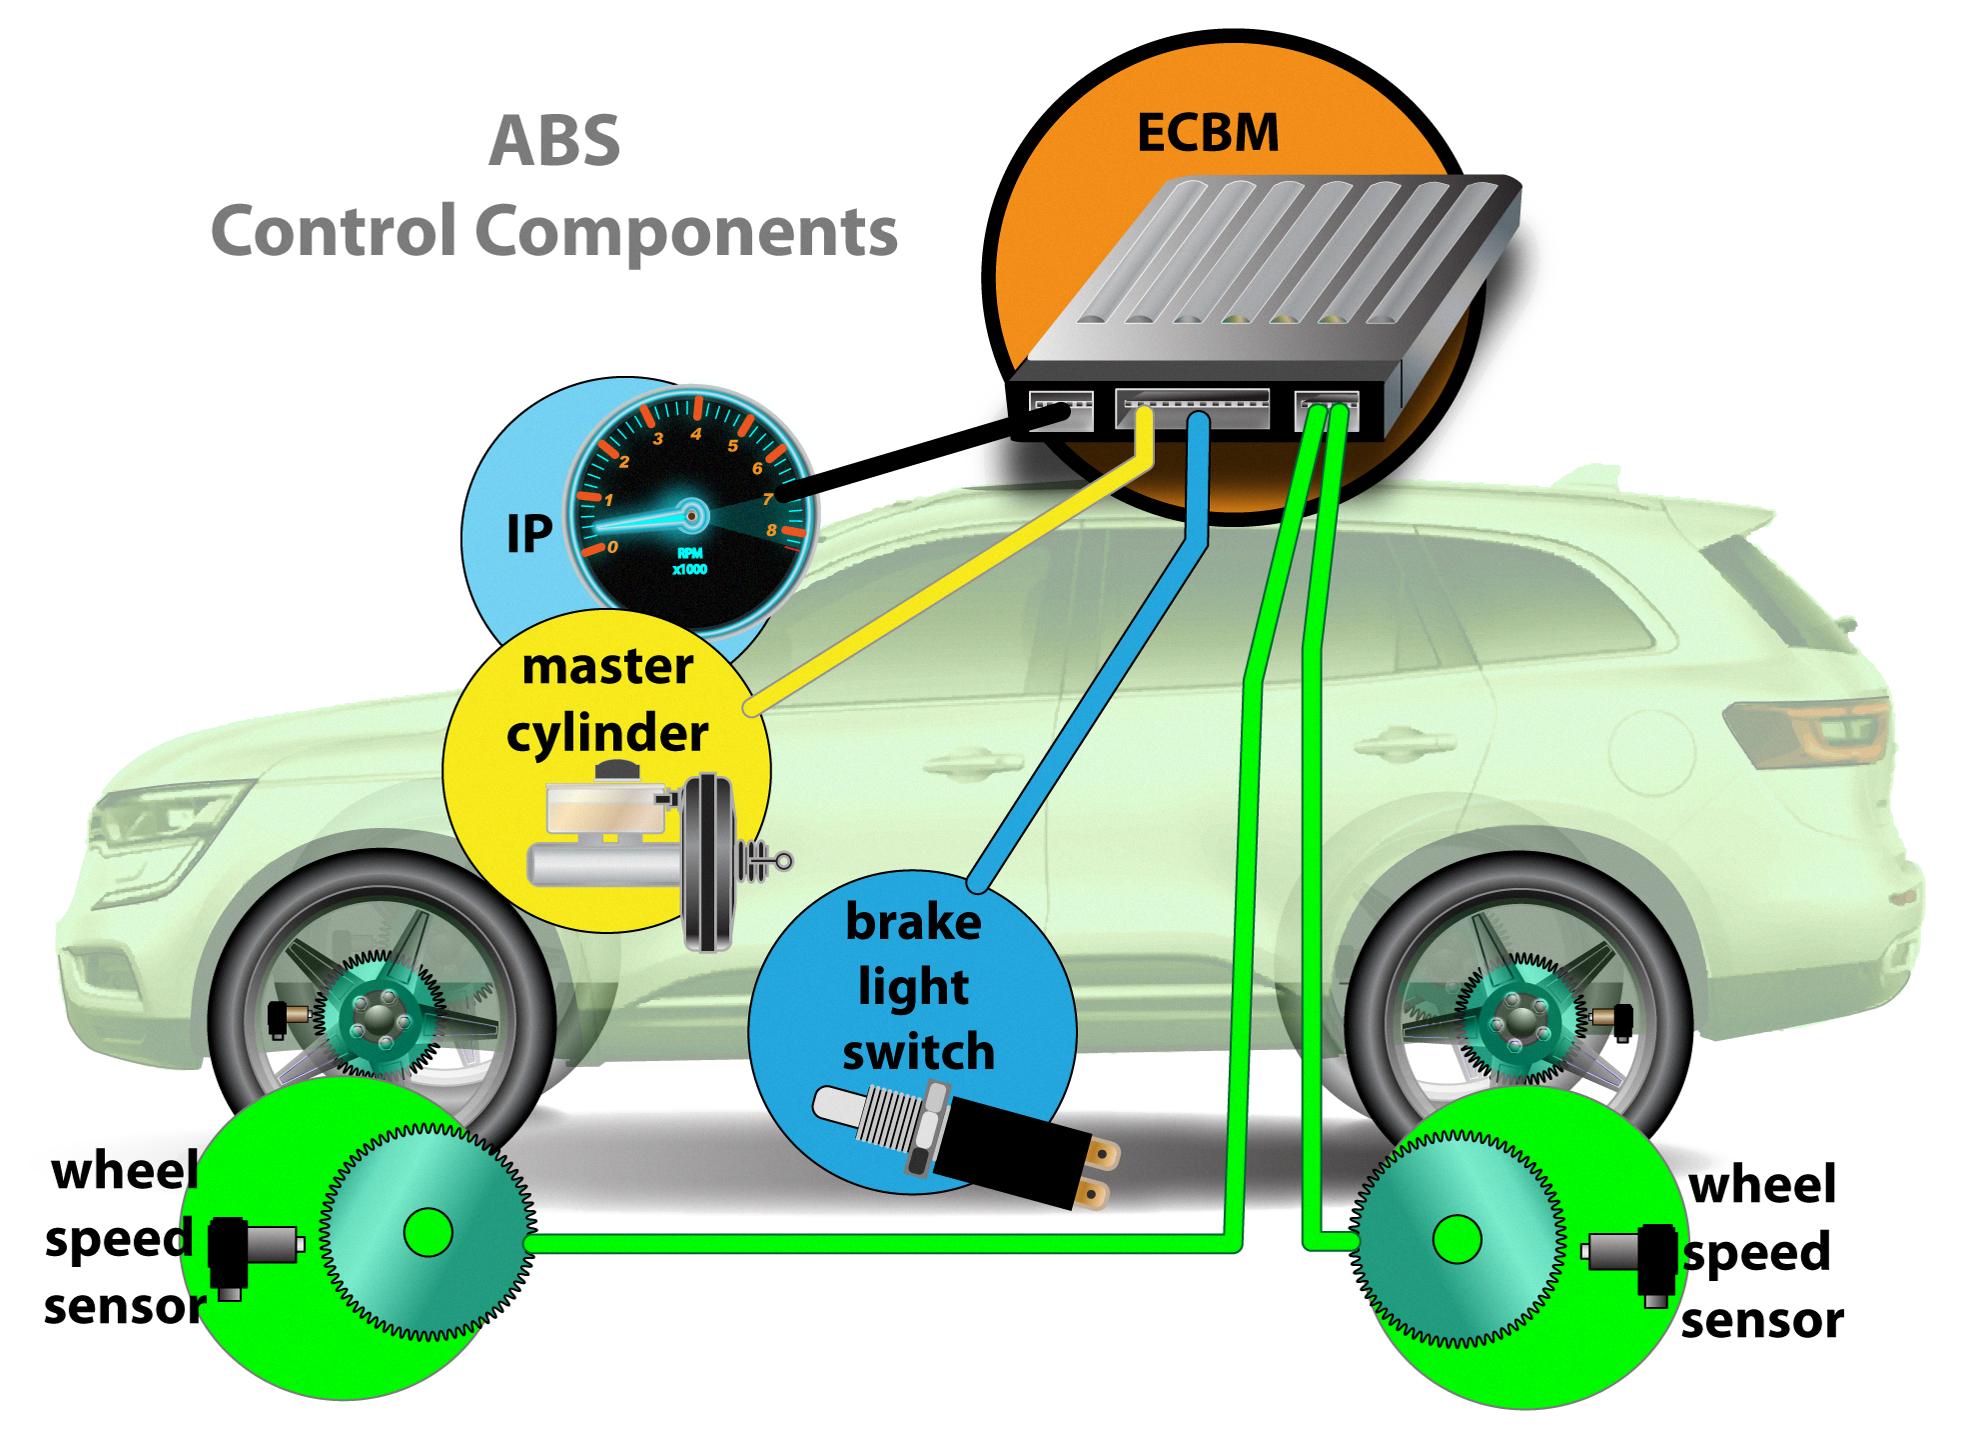 anti lock brakes stop a vehicle quicker than conventional brakes